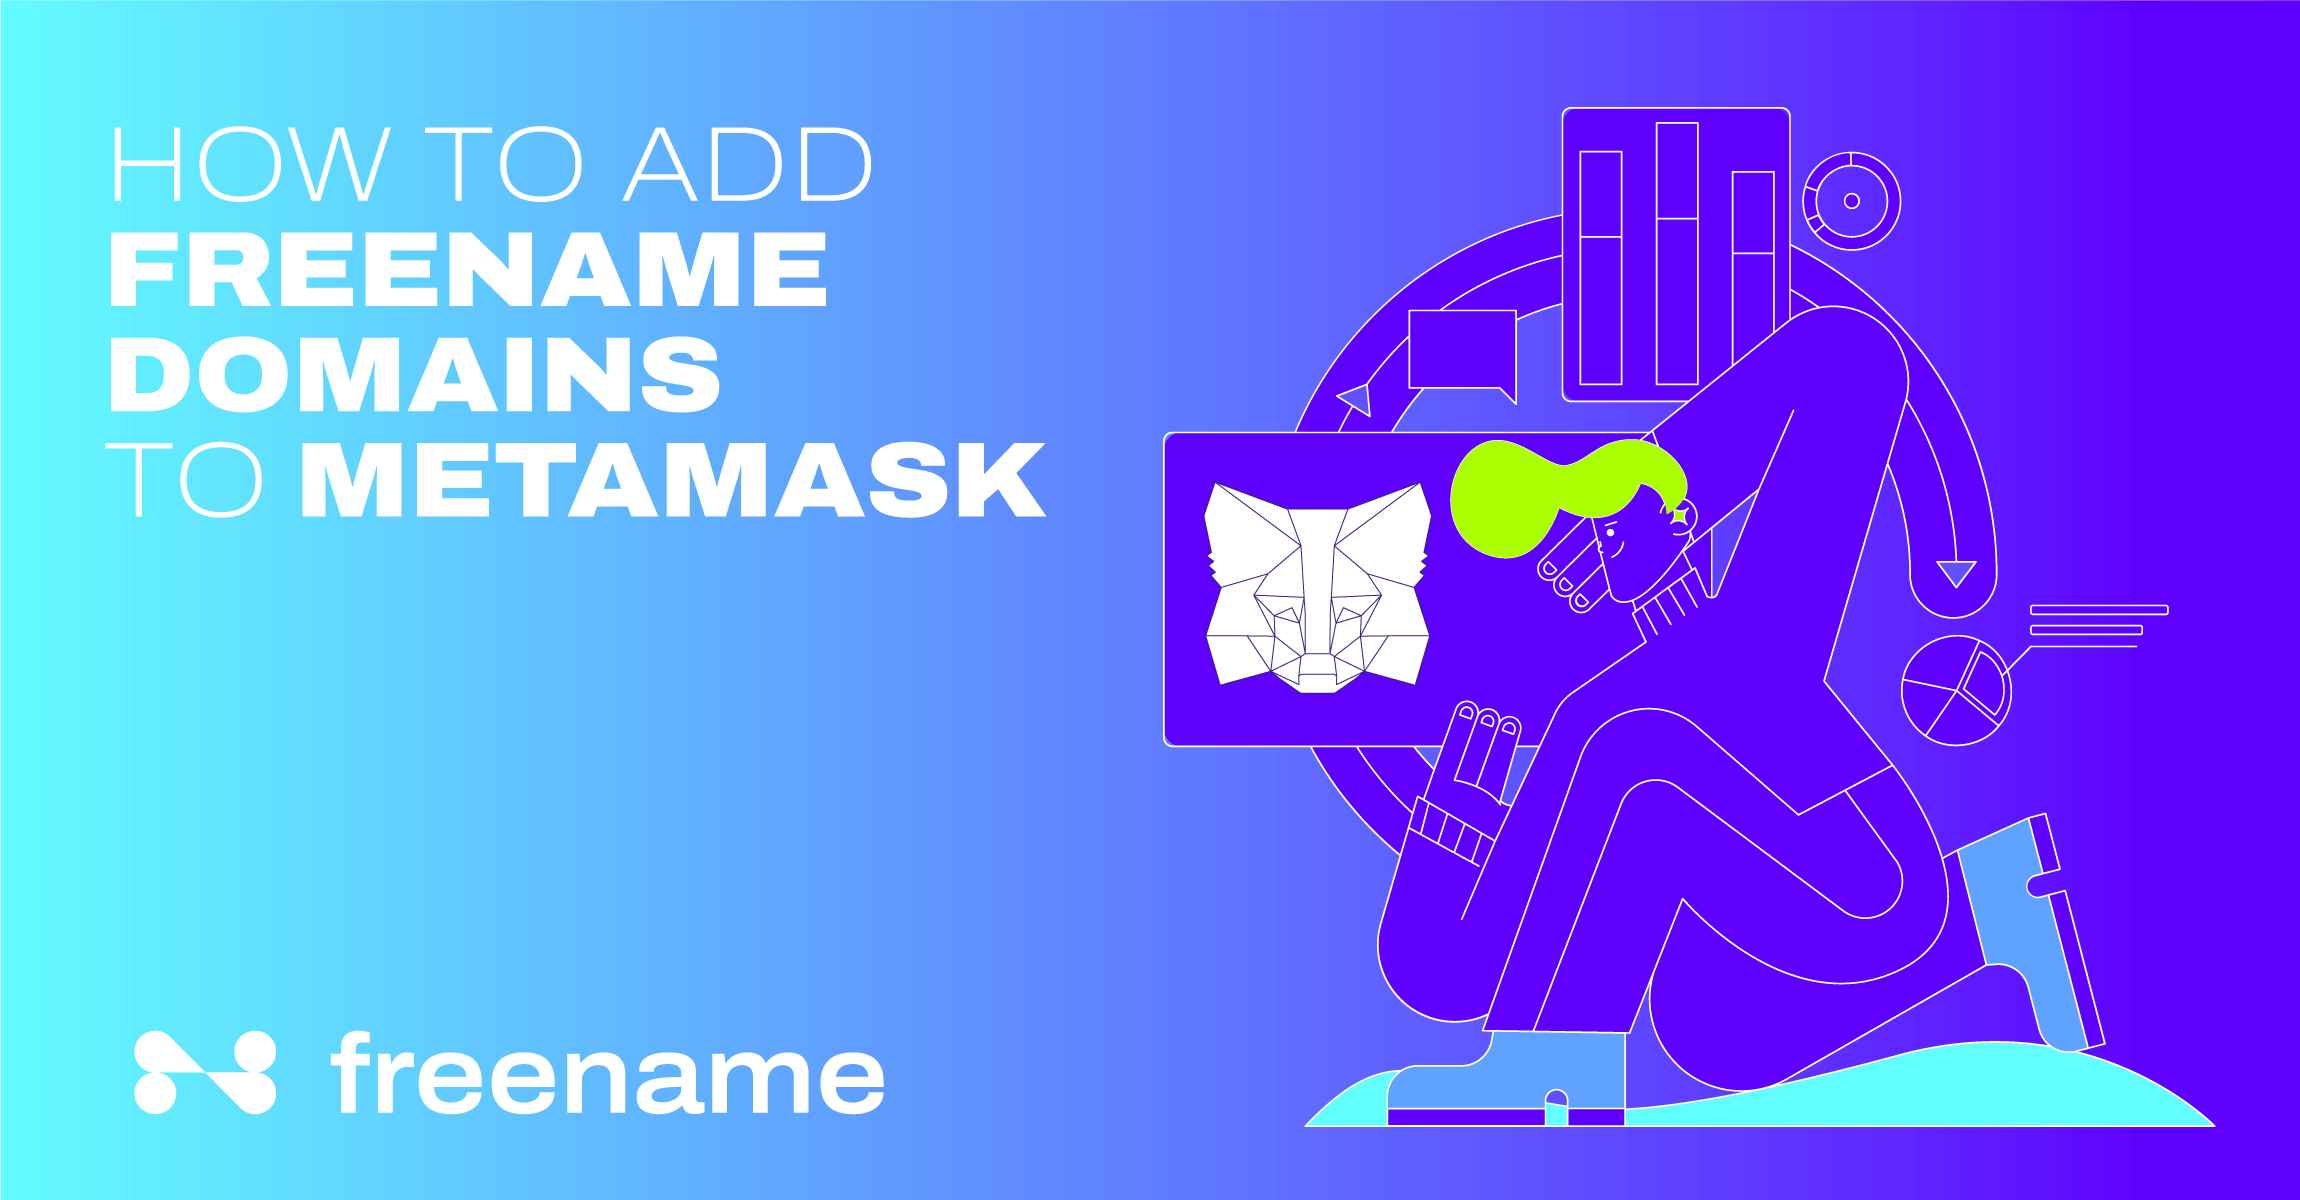 How to Add Freename Domains to Metamask